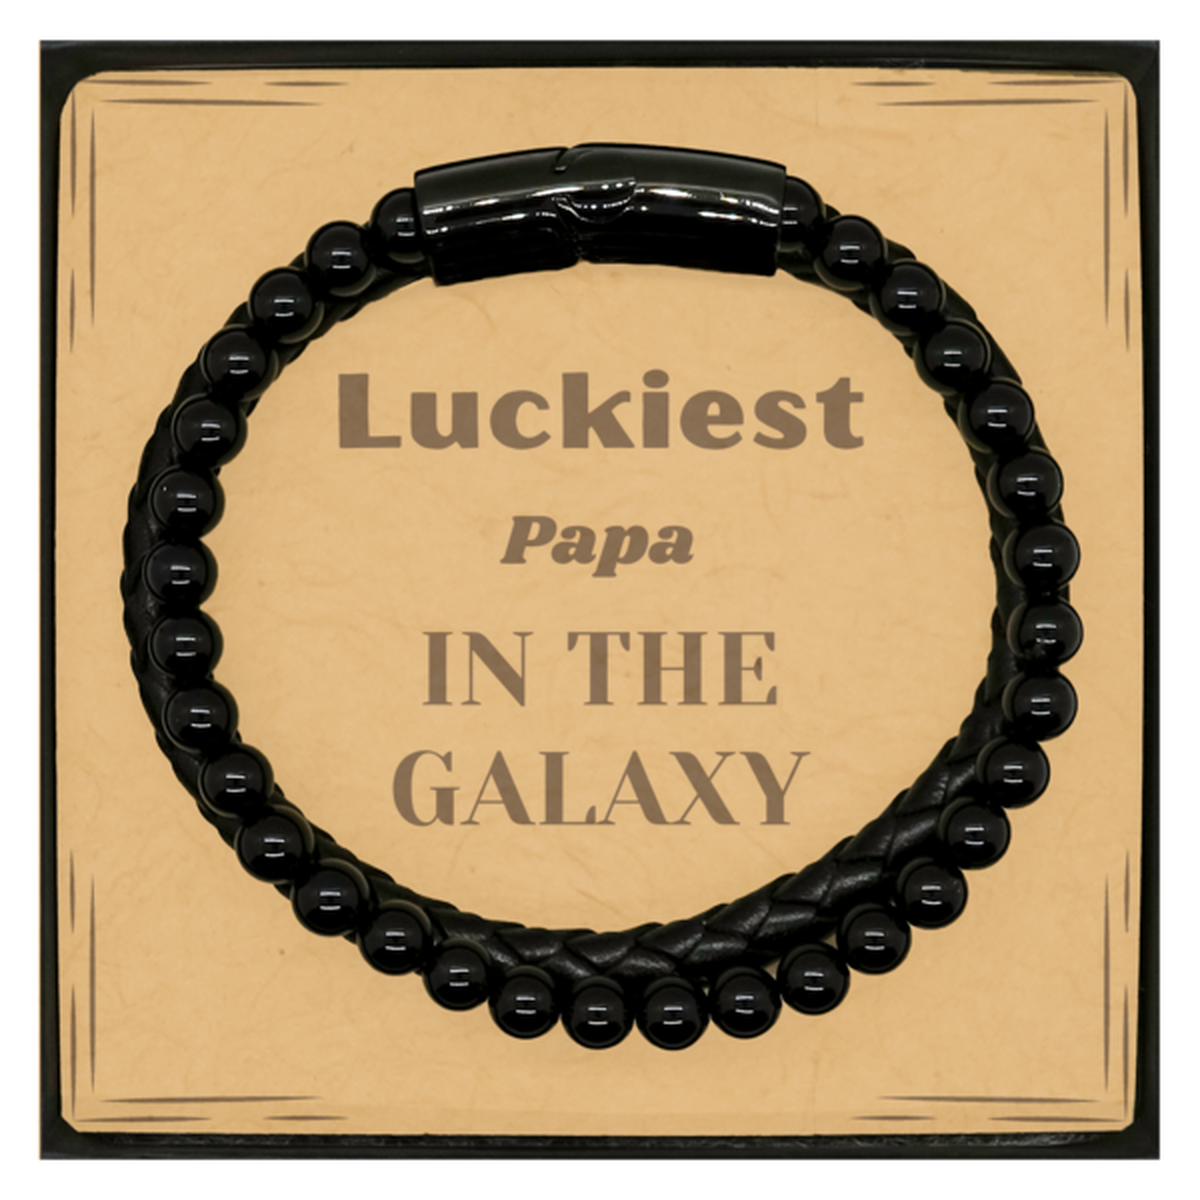 Luckiest Papa in the Galaxy, To My Papa Message Card Gifts, Christmas Papa Stone Leather Bracelets Gifts, X-mas Birthday Unique Gifts For Papa Men Women